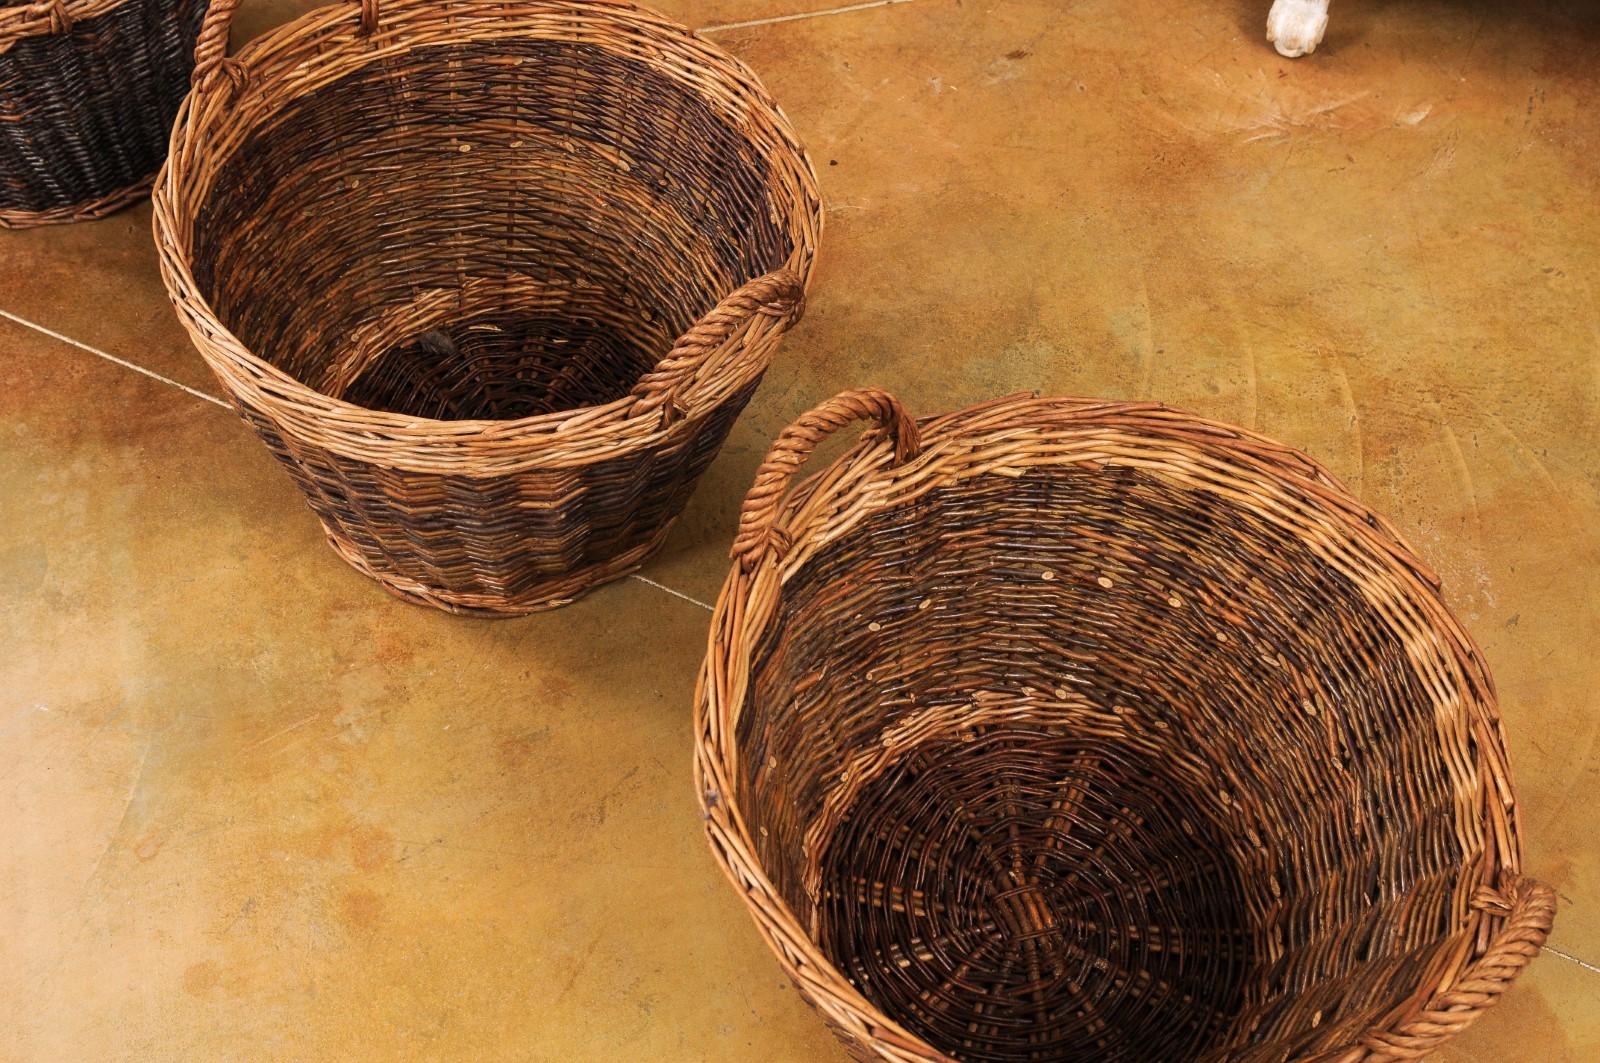 20th Century Handmade English Two Toned Wicker Baskets from Devon with Double Handles, Each